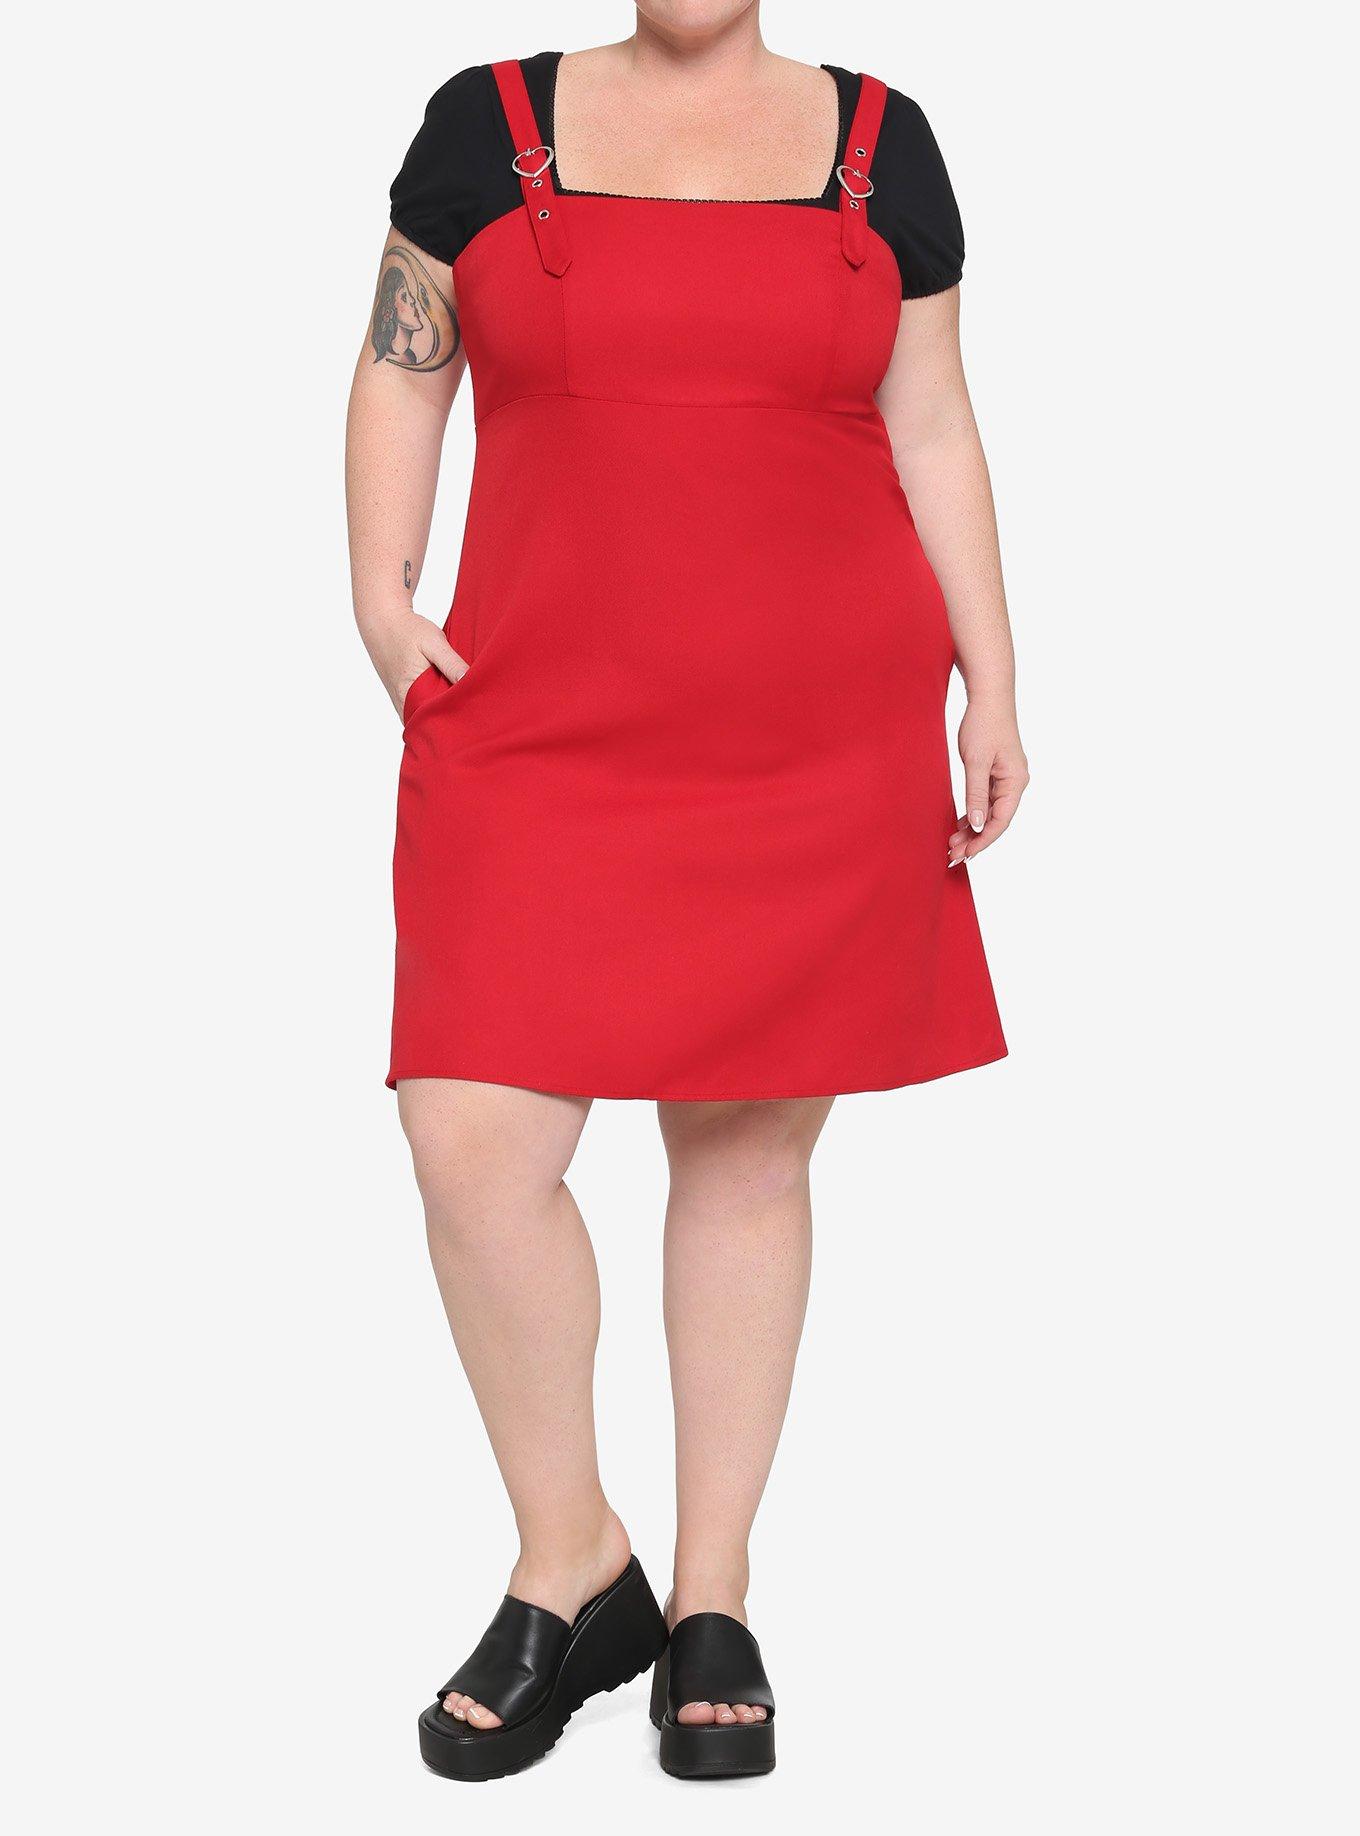 Red Heart Buckle Pinafore Dress Plus Size, RED, alternate